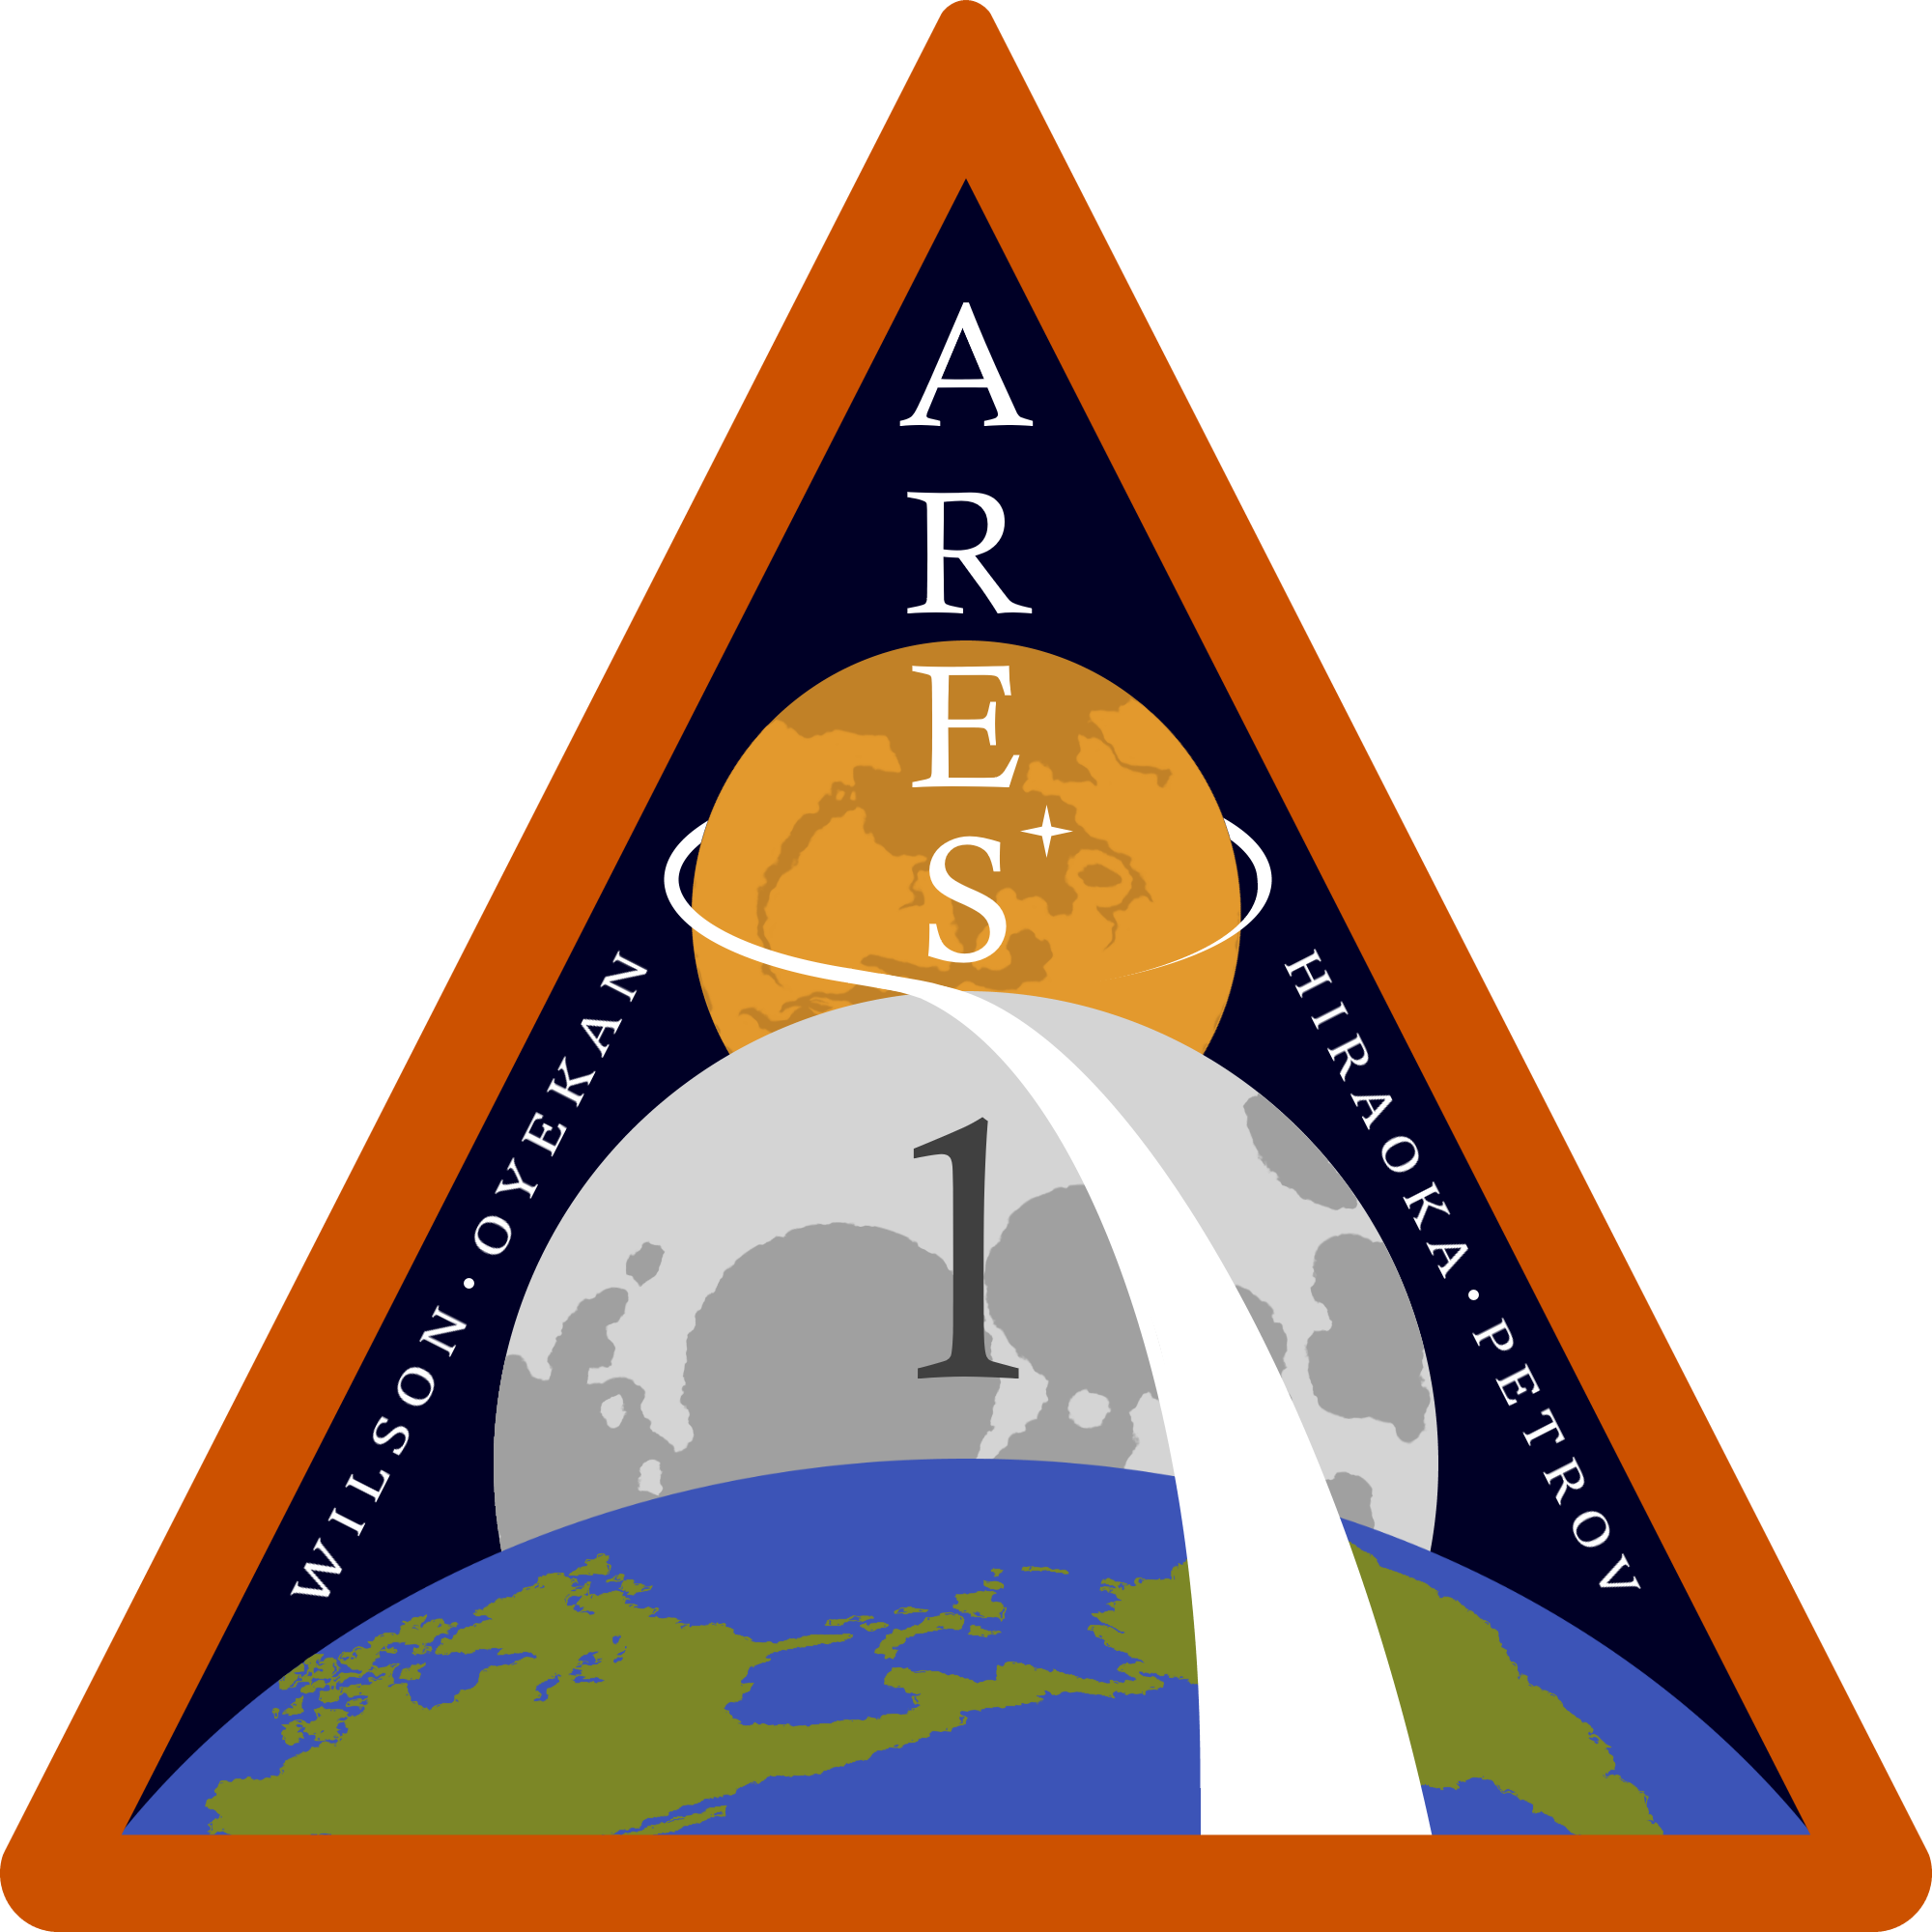 Ares I mission patch rust.png